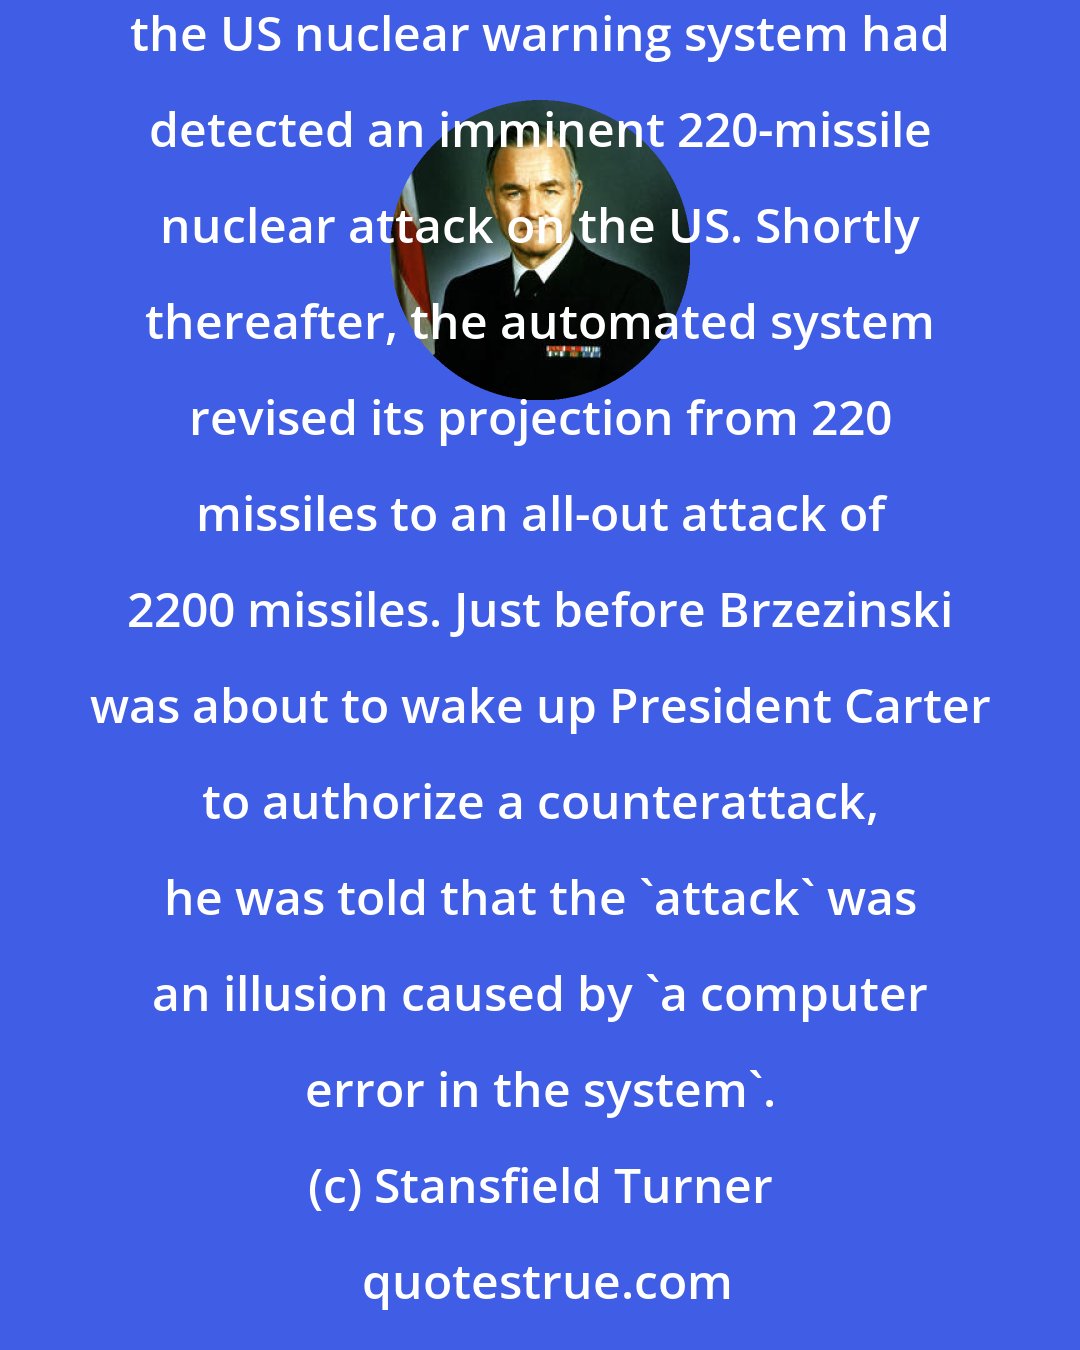 Stansfield Turner: At 2:26 AM on 3 June 1980, Colonel William Odom of the Strategic Air Command alerted National Security Advisor Zbigniew Brzezinski that the US nuclear warning system had detected an imminent 220-missile nuclear attack on the US. Shortly thereafter, the automated system revised its projection from 220 missiles to an all-out attack of 2200 missiles. Just before Brzezinski was about to wake up President Carter to authorize a counterattack, he was told that the 'attack' was an illusion caused by 'a computer error in the system'.